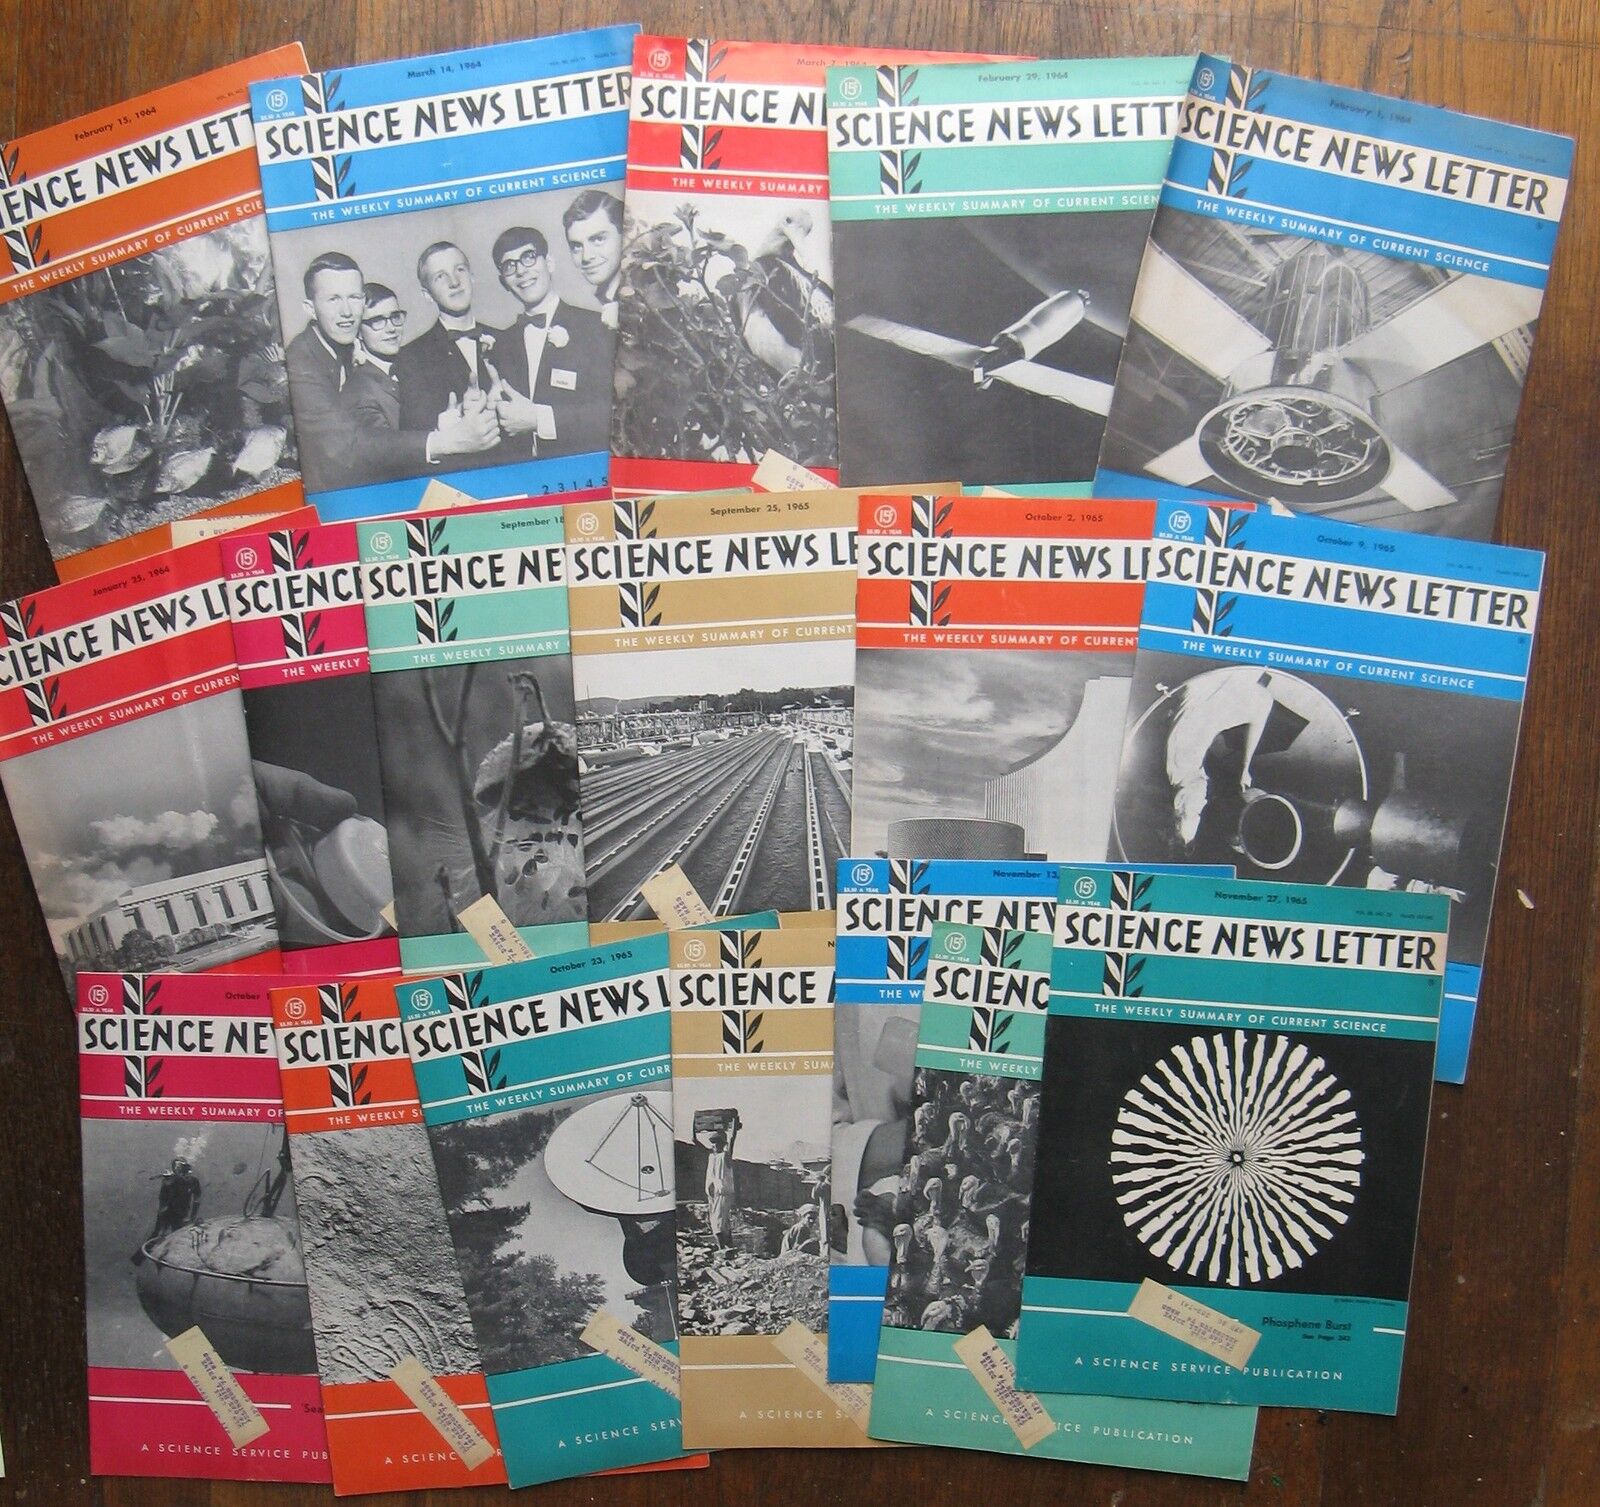 18 issues of Science News Letter 1964-1965 